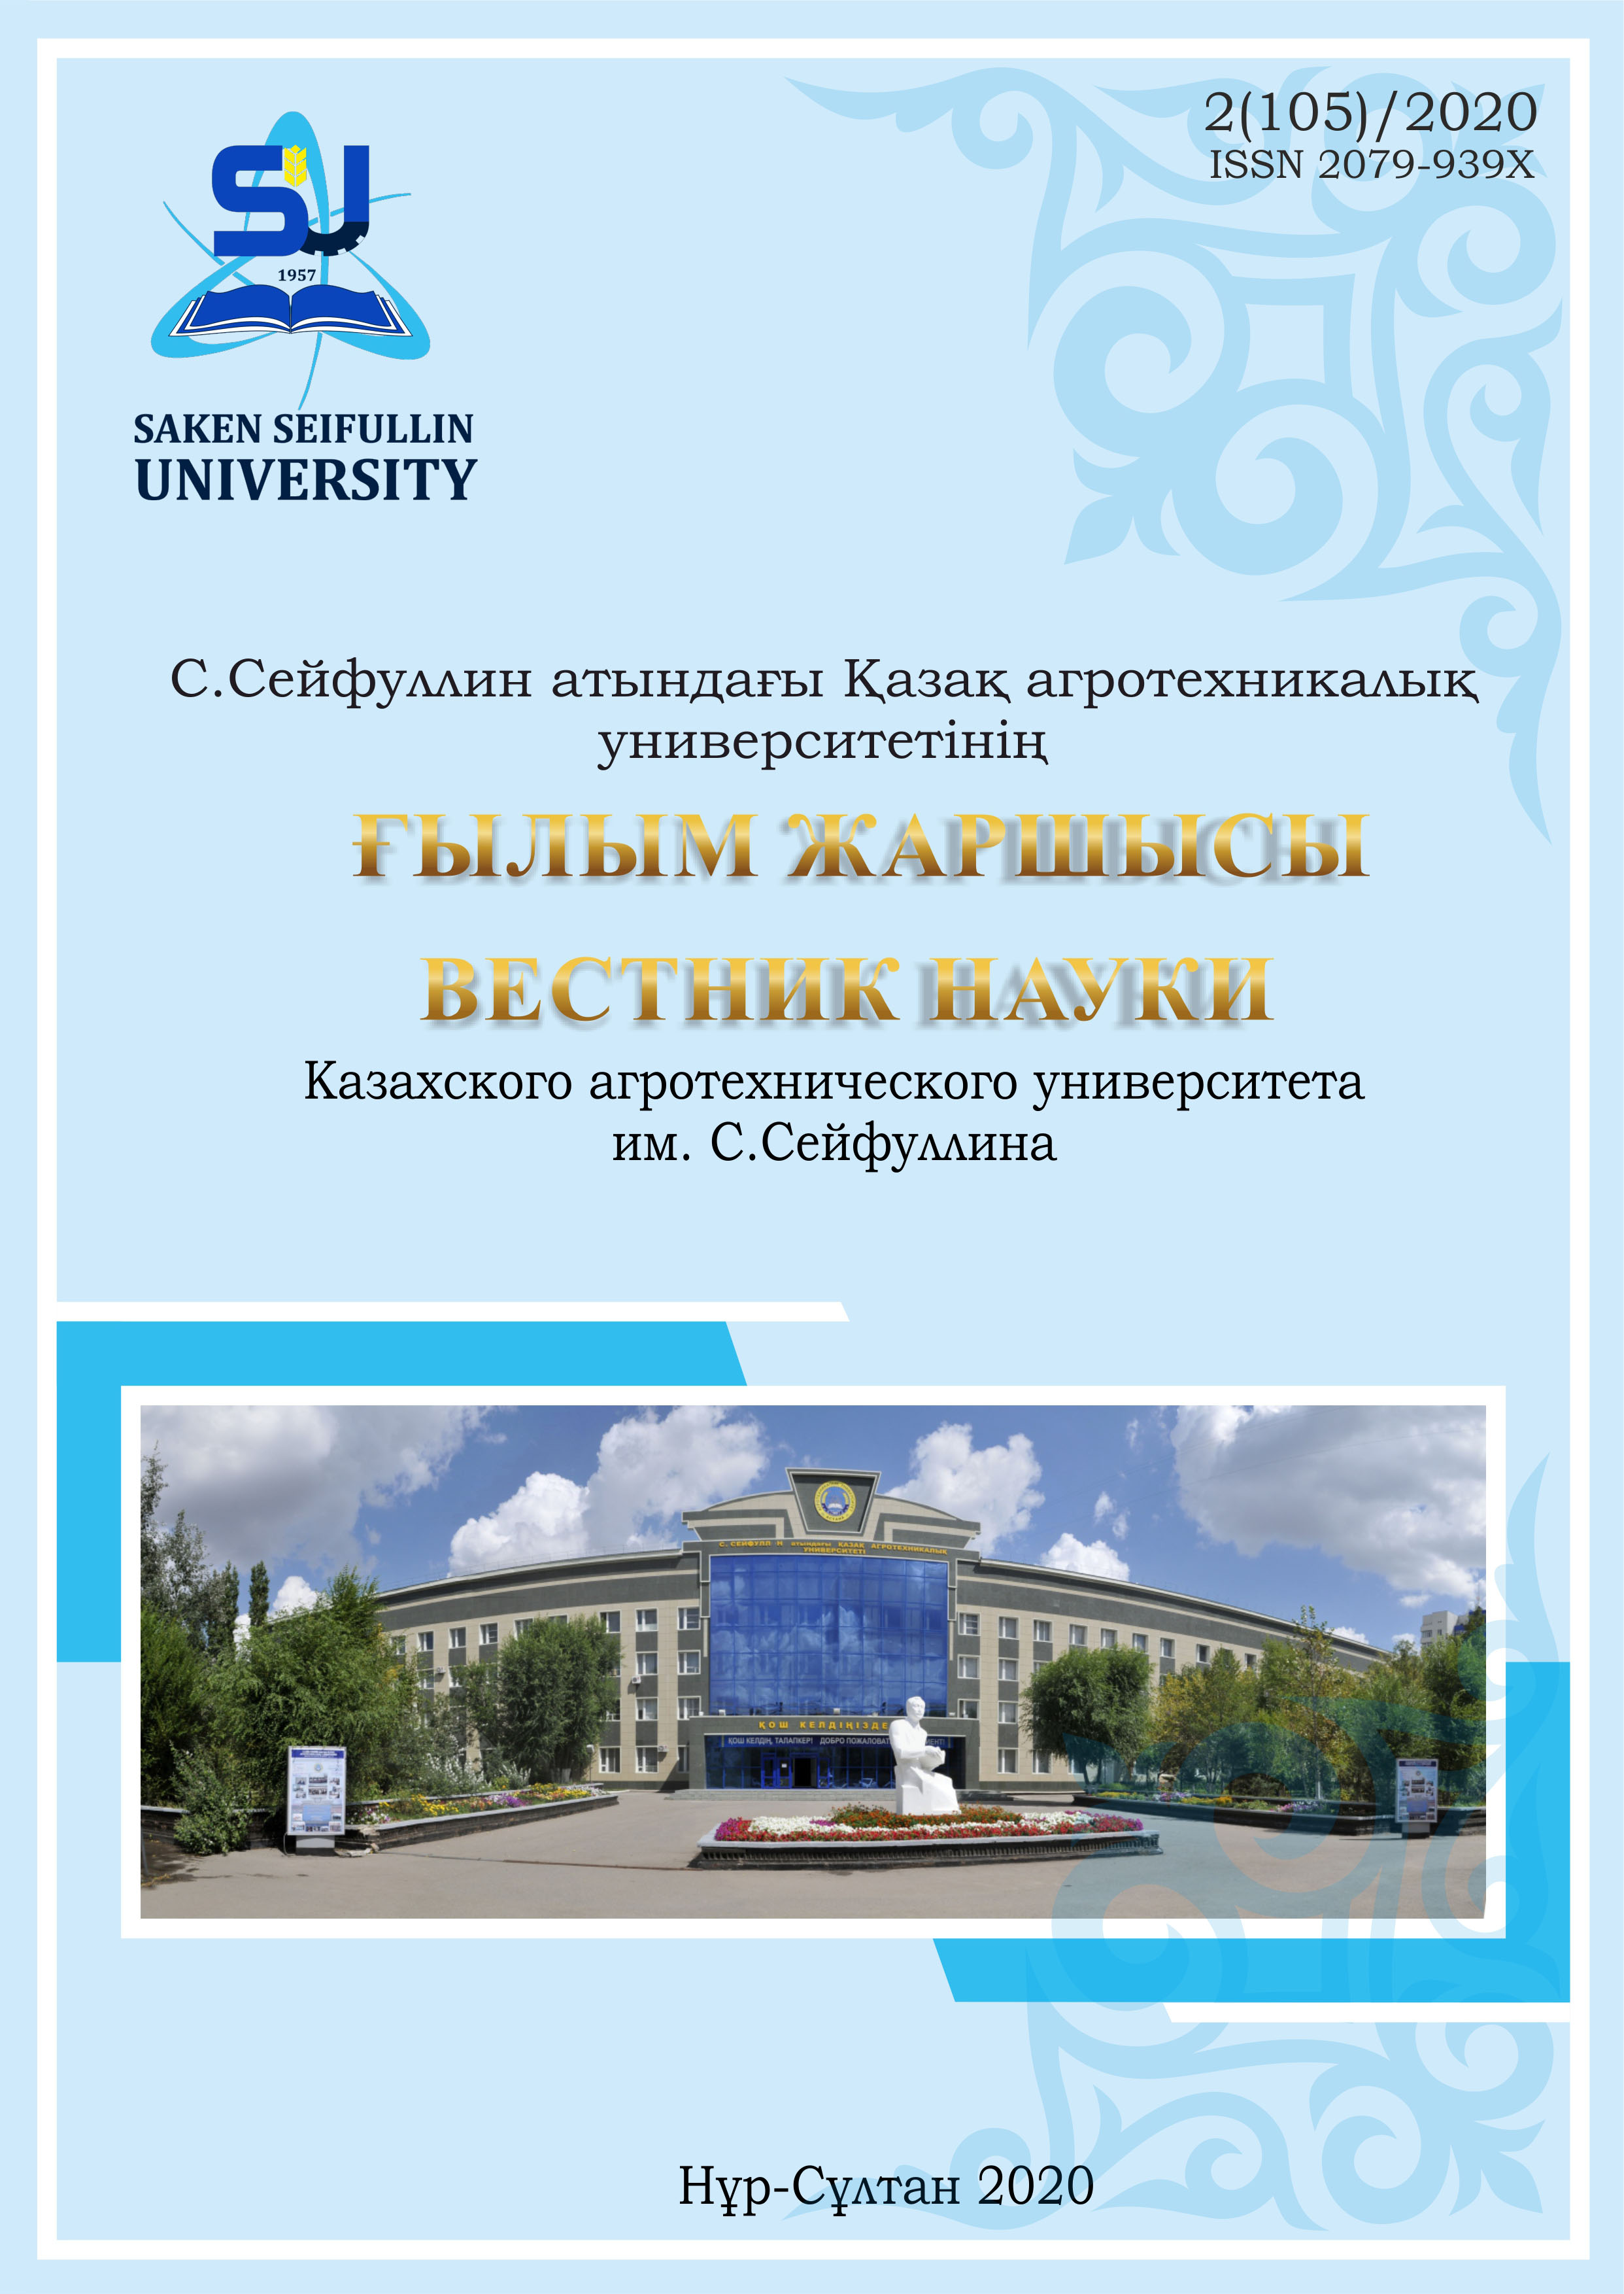 					View No. 2 (105) (2020): Herald of Science of S. Seifullin KAZAKH AGRO TECHNICAL UNIVERSITY
				